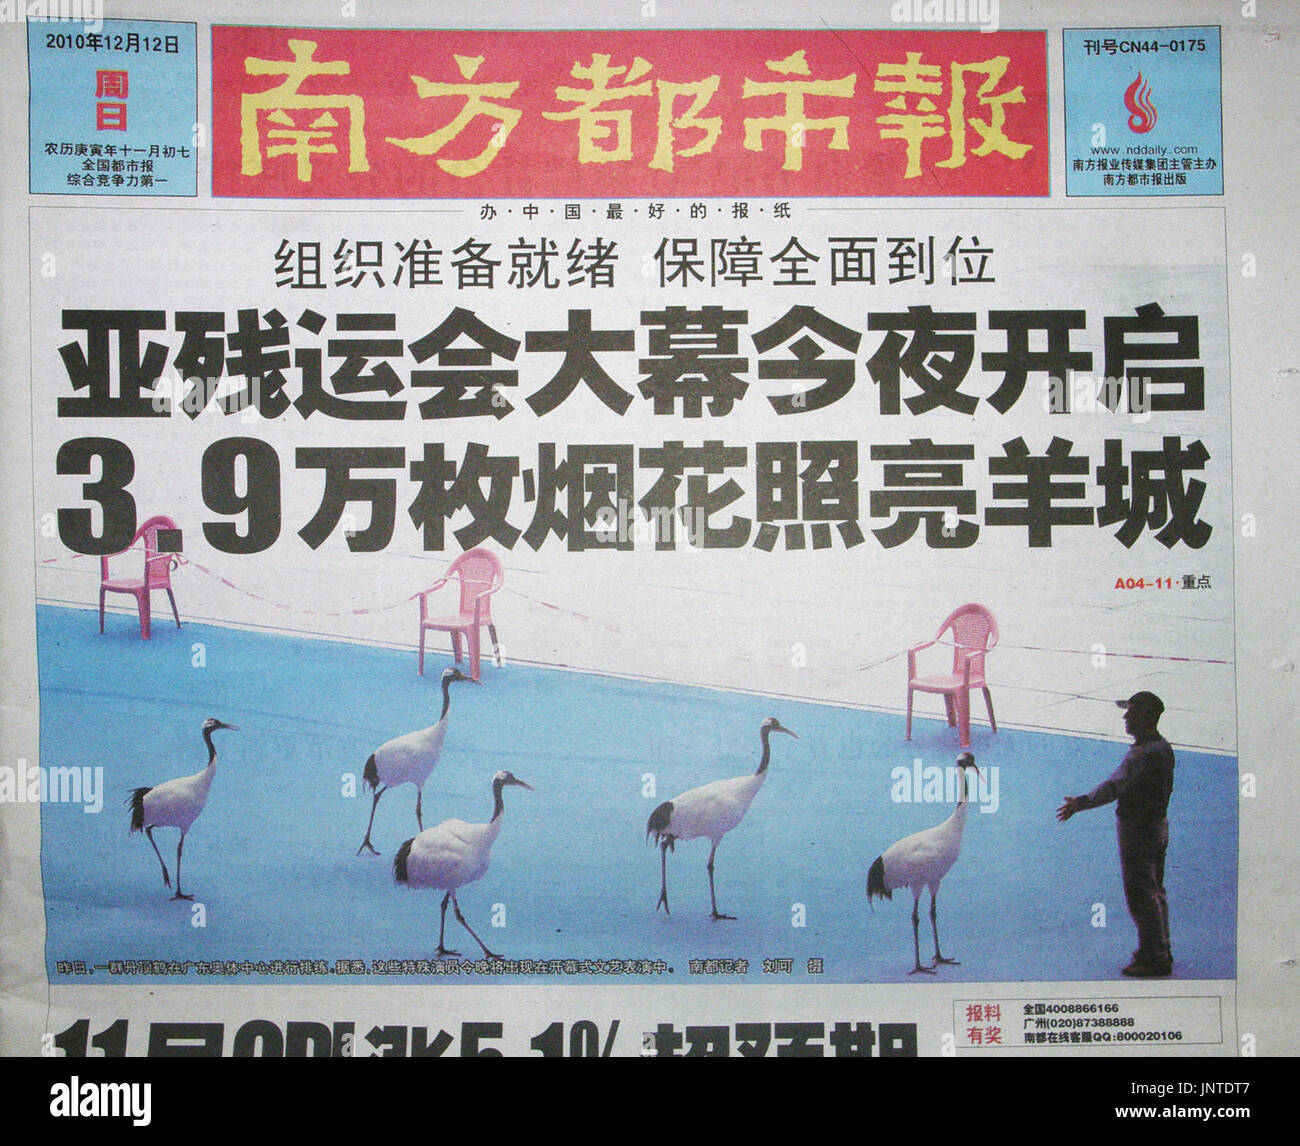 HONG KONG, China - Photo shows the front page of the Nanfang Dushi Bao newspaper in Guangdong Province dated Dec. 12, 2010, carrying a photo of a rehearsal for the Asian Para Games' opening ceremony. The selection of the photo showing empty seats has raised speculation that it could be a hidden message supporting imprisoned Nobel peace prize laureate Liu Xiaobo as an empty seat at the closely watched award ceremony in Oslo highlighted his absence. The newspaper flatly denies the rumor. (Kyodo) Stock Photo